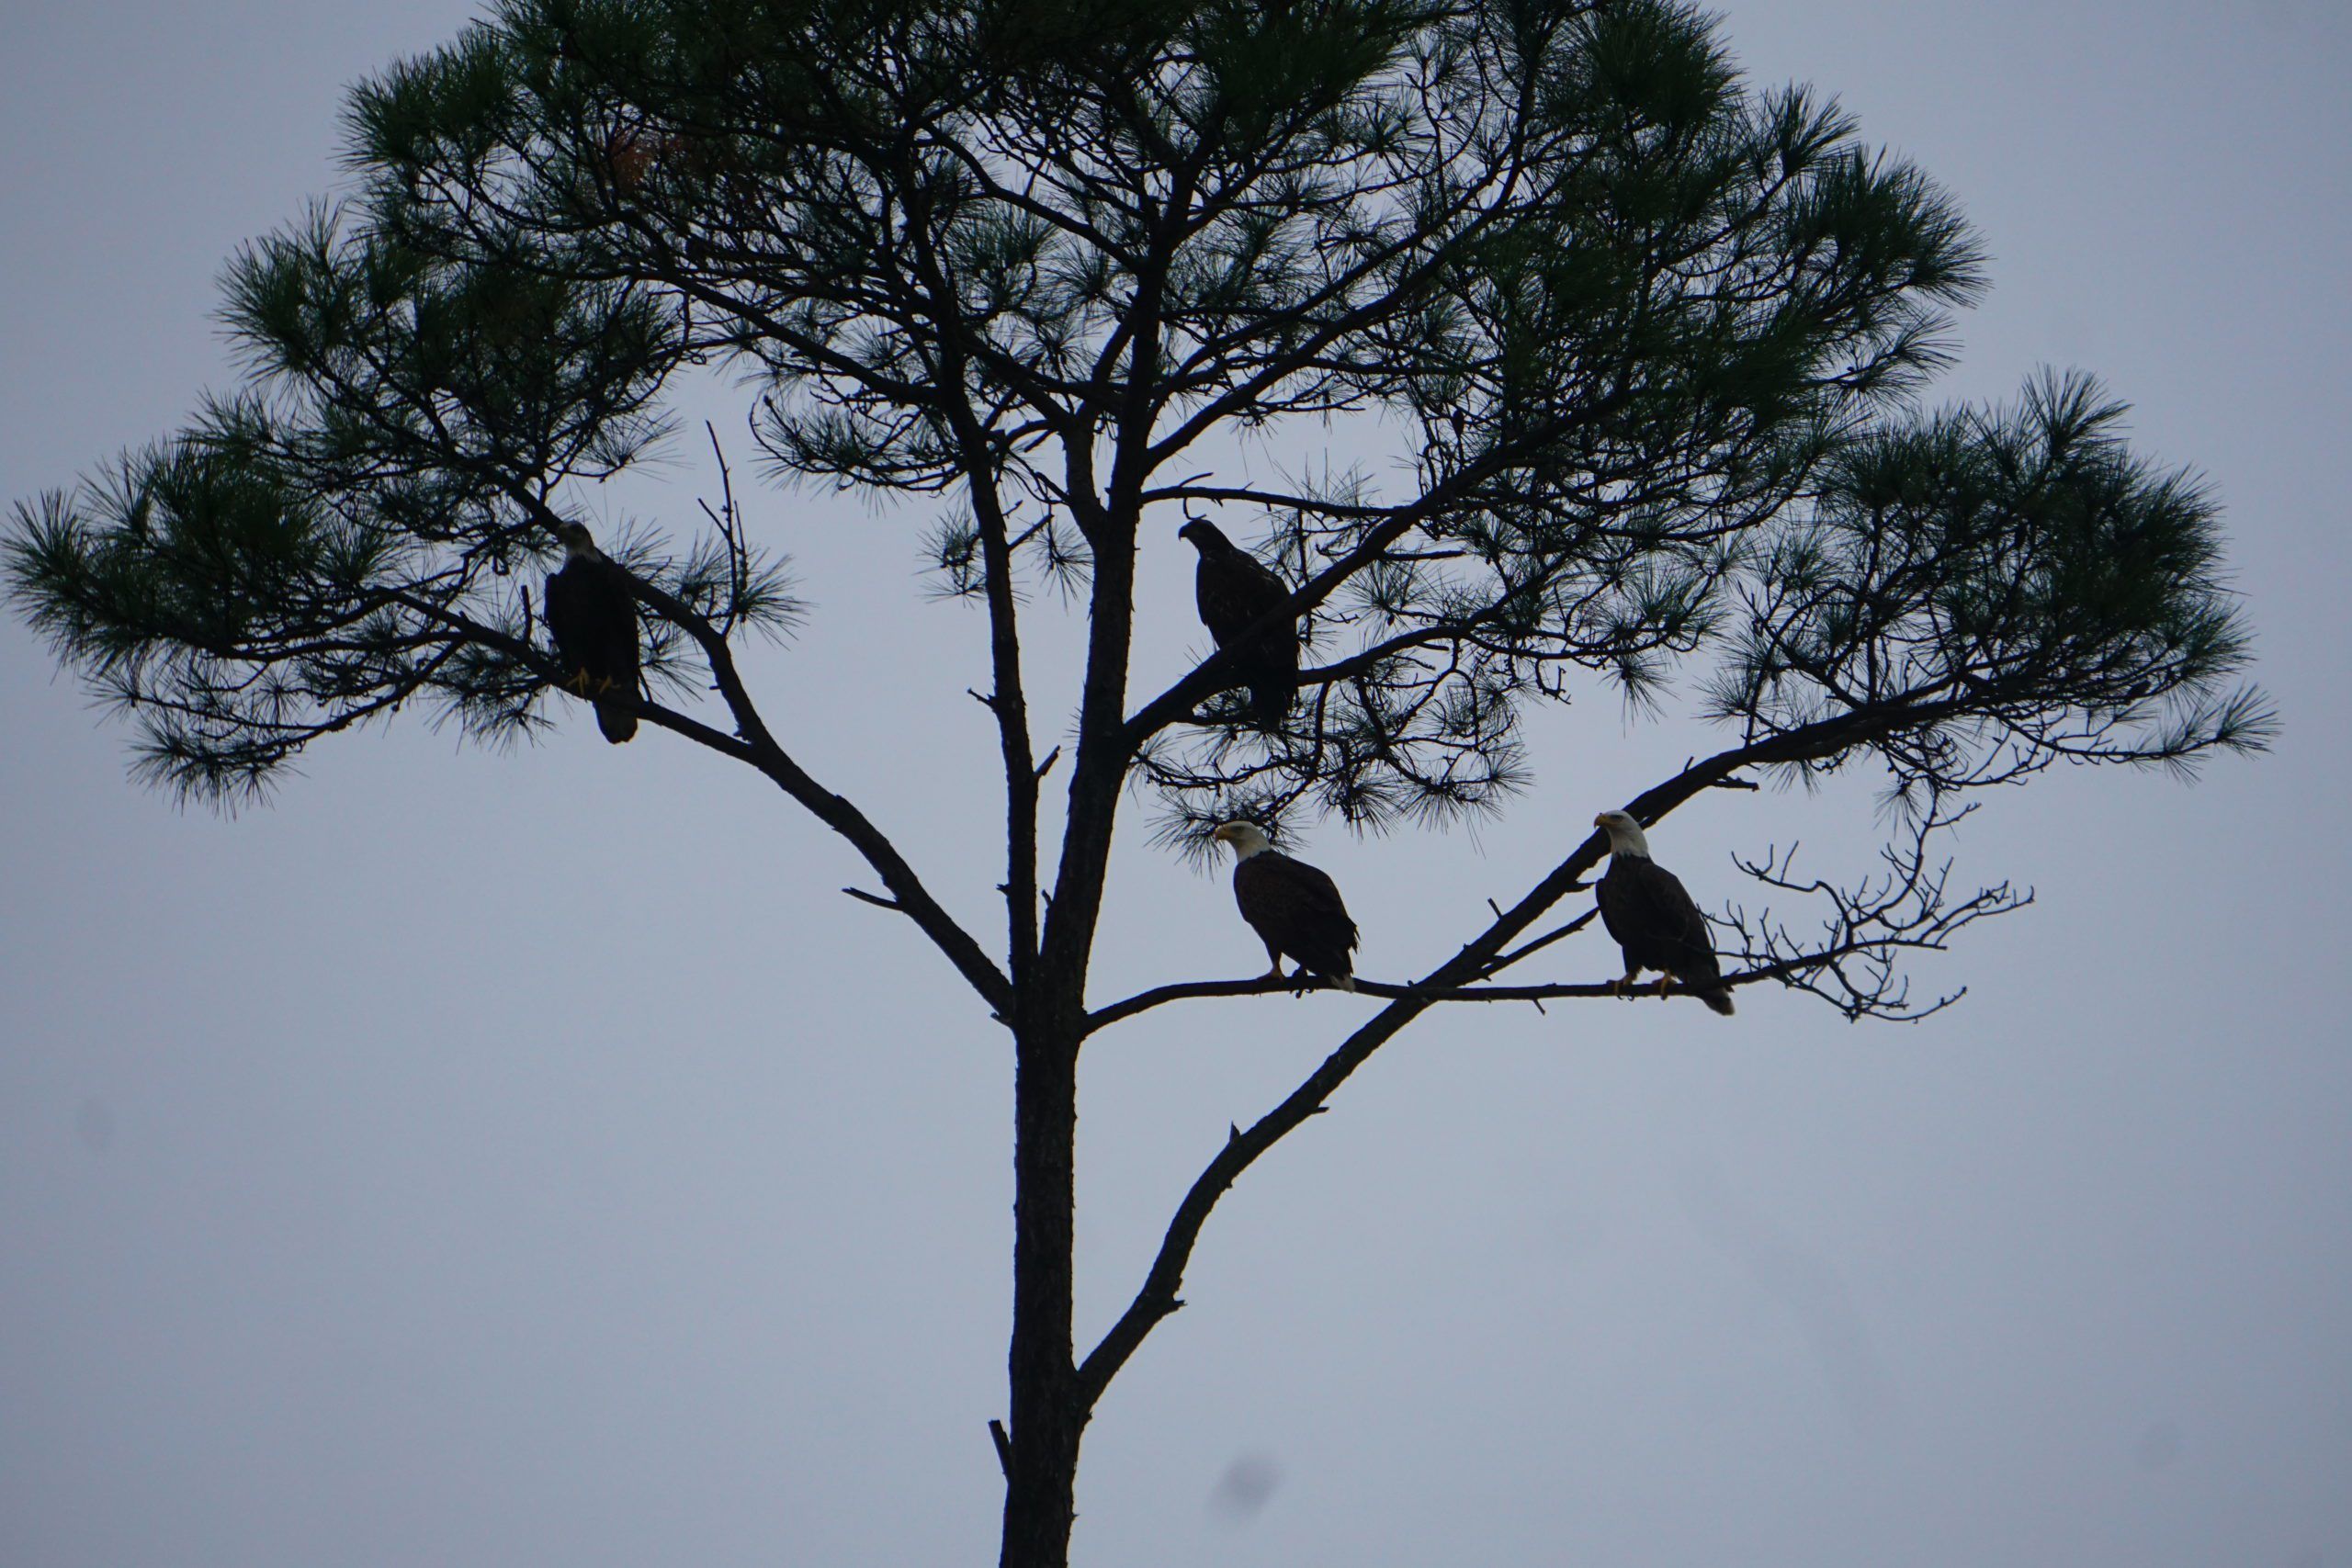 Today's Photo of the Day comes from Don Britt. Don spotted a family of four eagles outside his front door in Navarre. 🦅